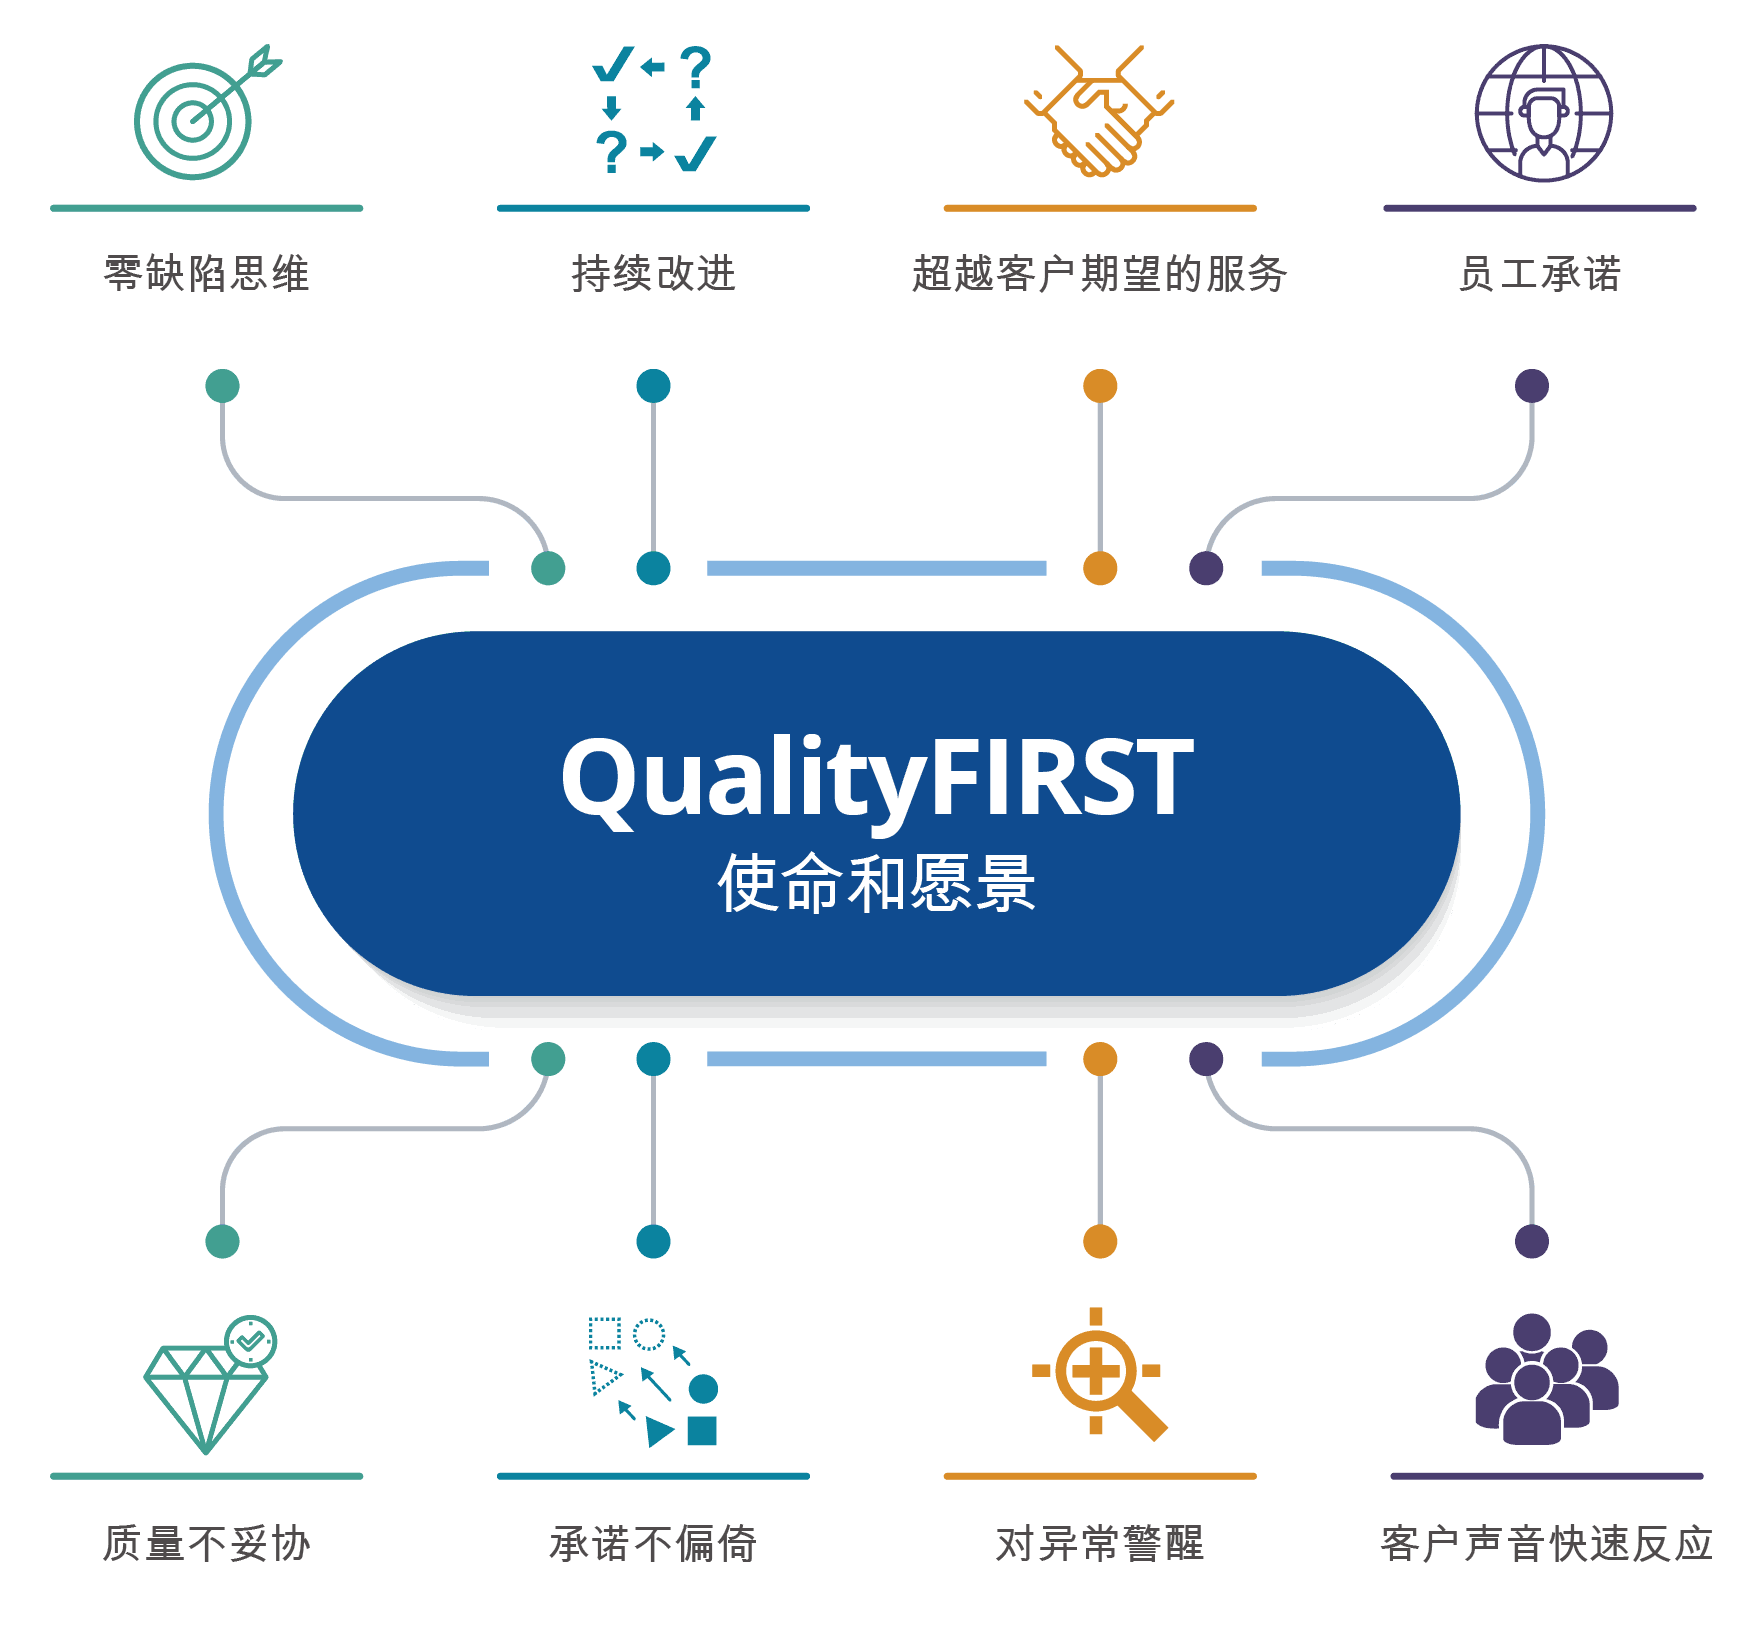 Amkor Quality First 使命和愿景信息图